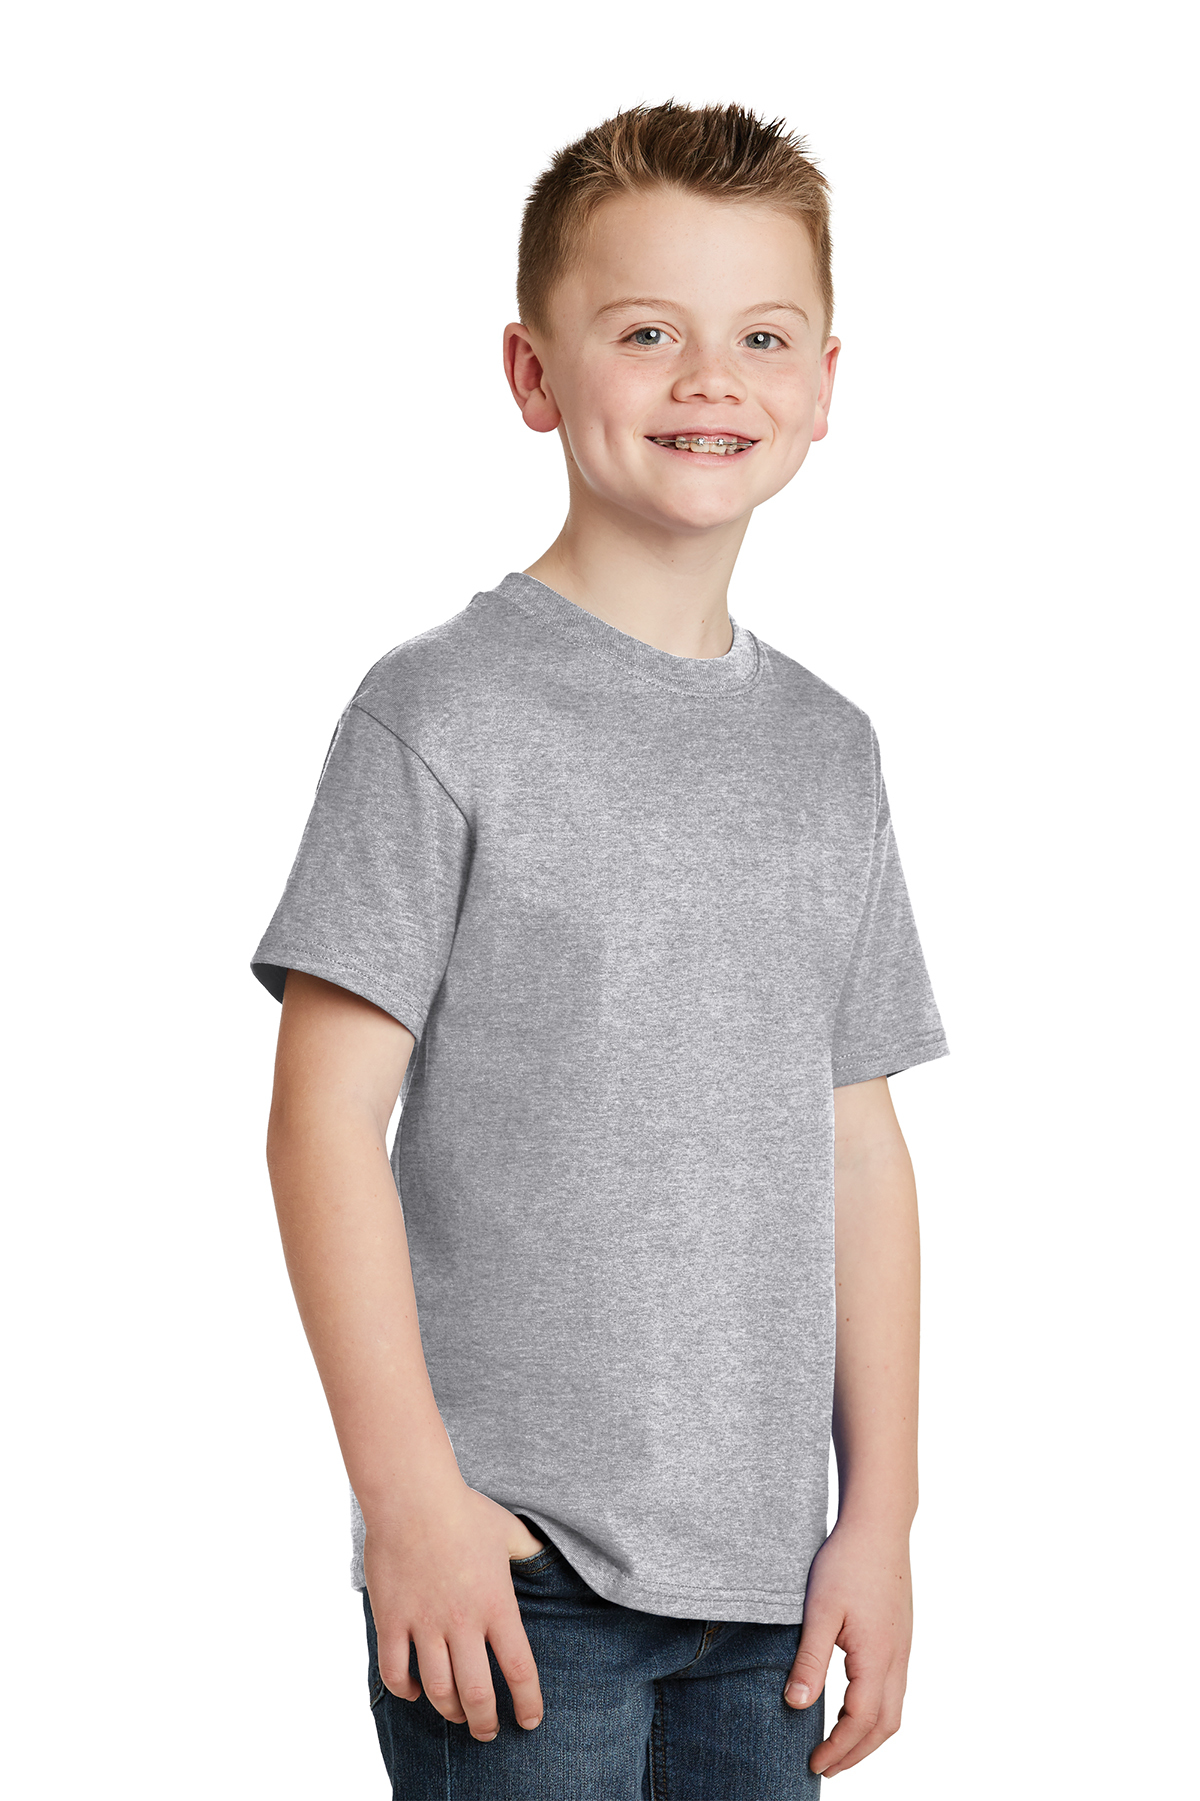 Hanes Youth Tagless 100 Cotton T Shirt 6 6 1 100 Cotton